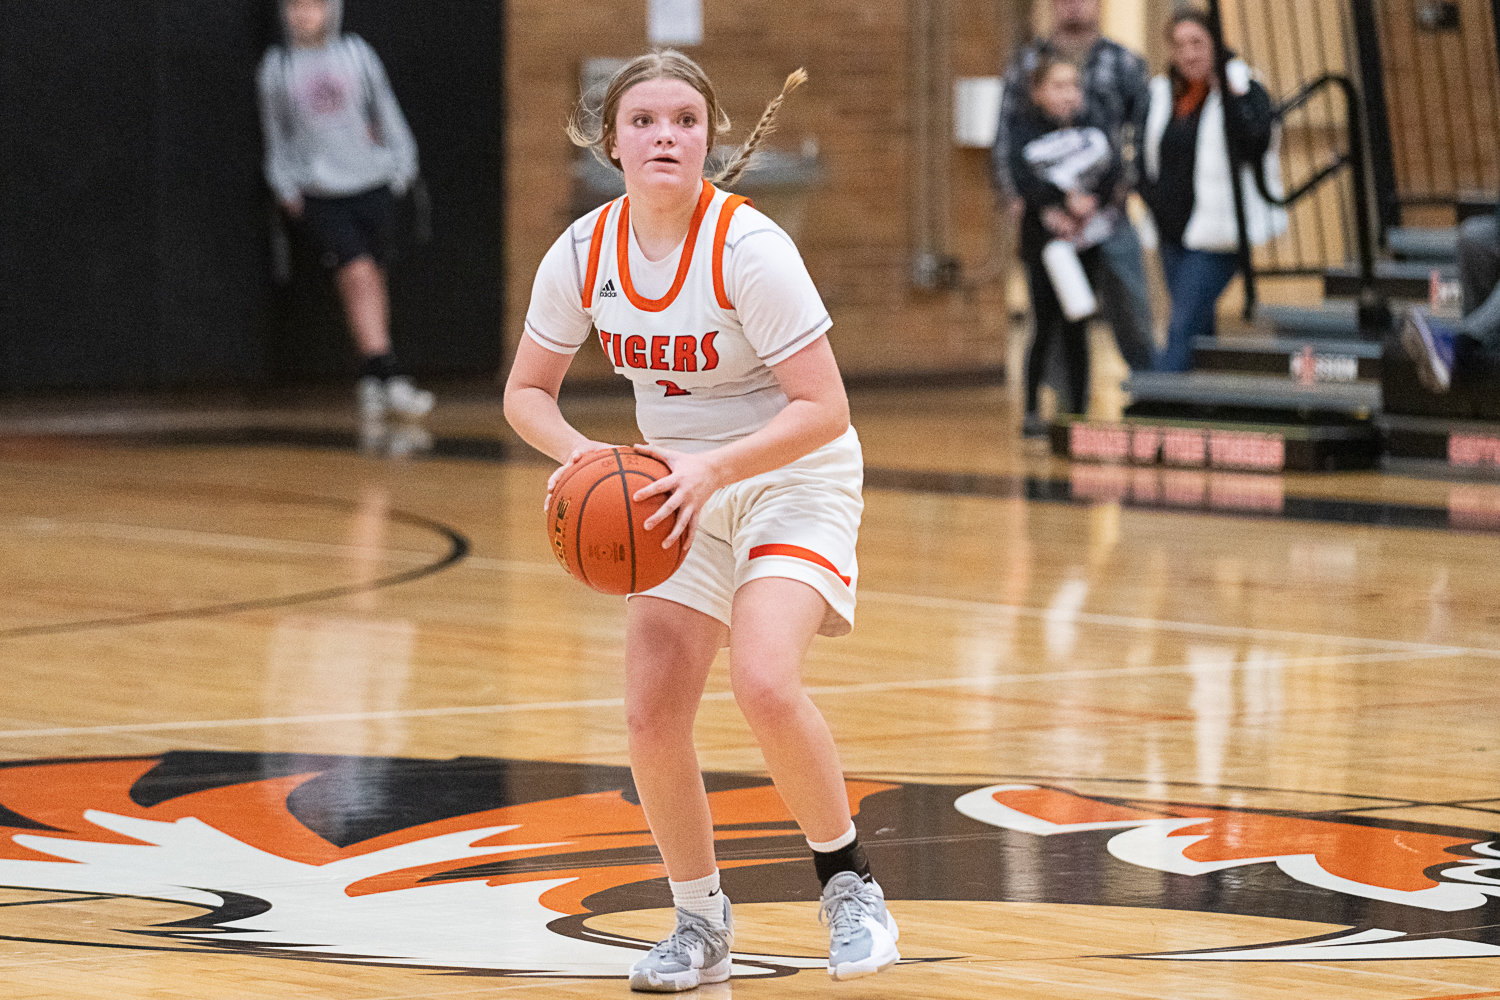 Brooklyn Sprague looks to pass during the fourth quarter of Centralia's loss to Heritage on Dec. 2.